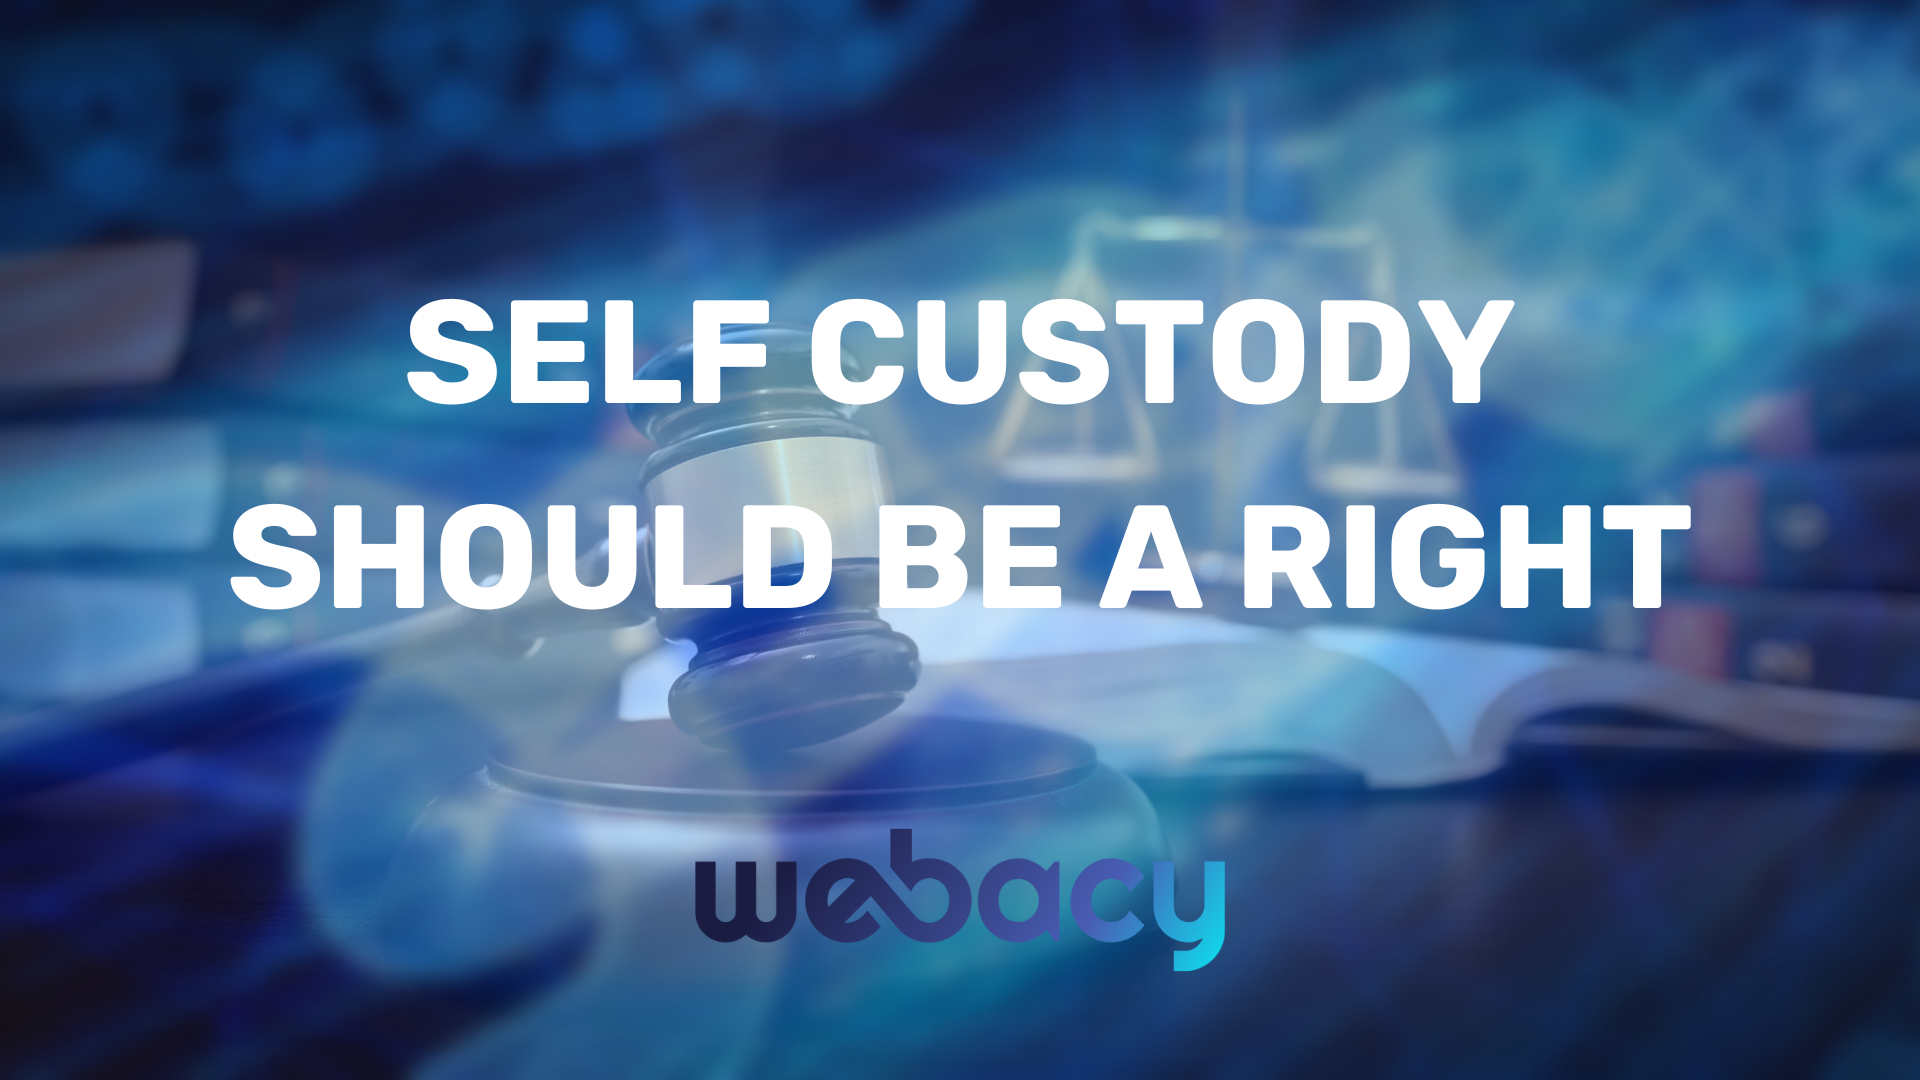 Self-Custody Should be a Right: Here’s Why